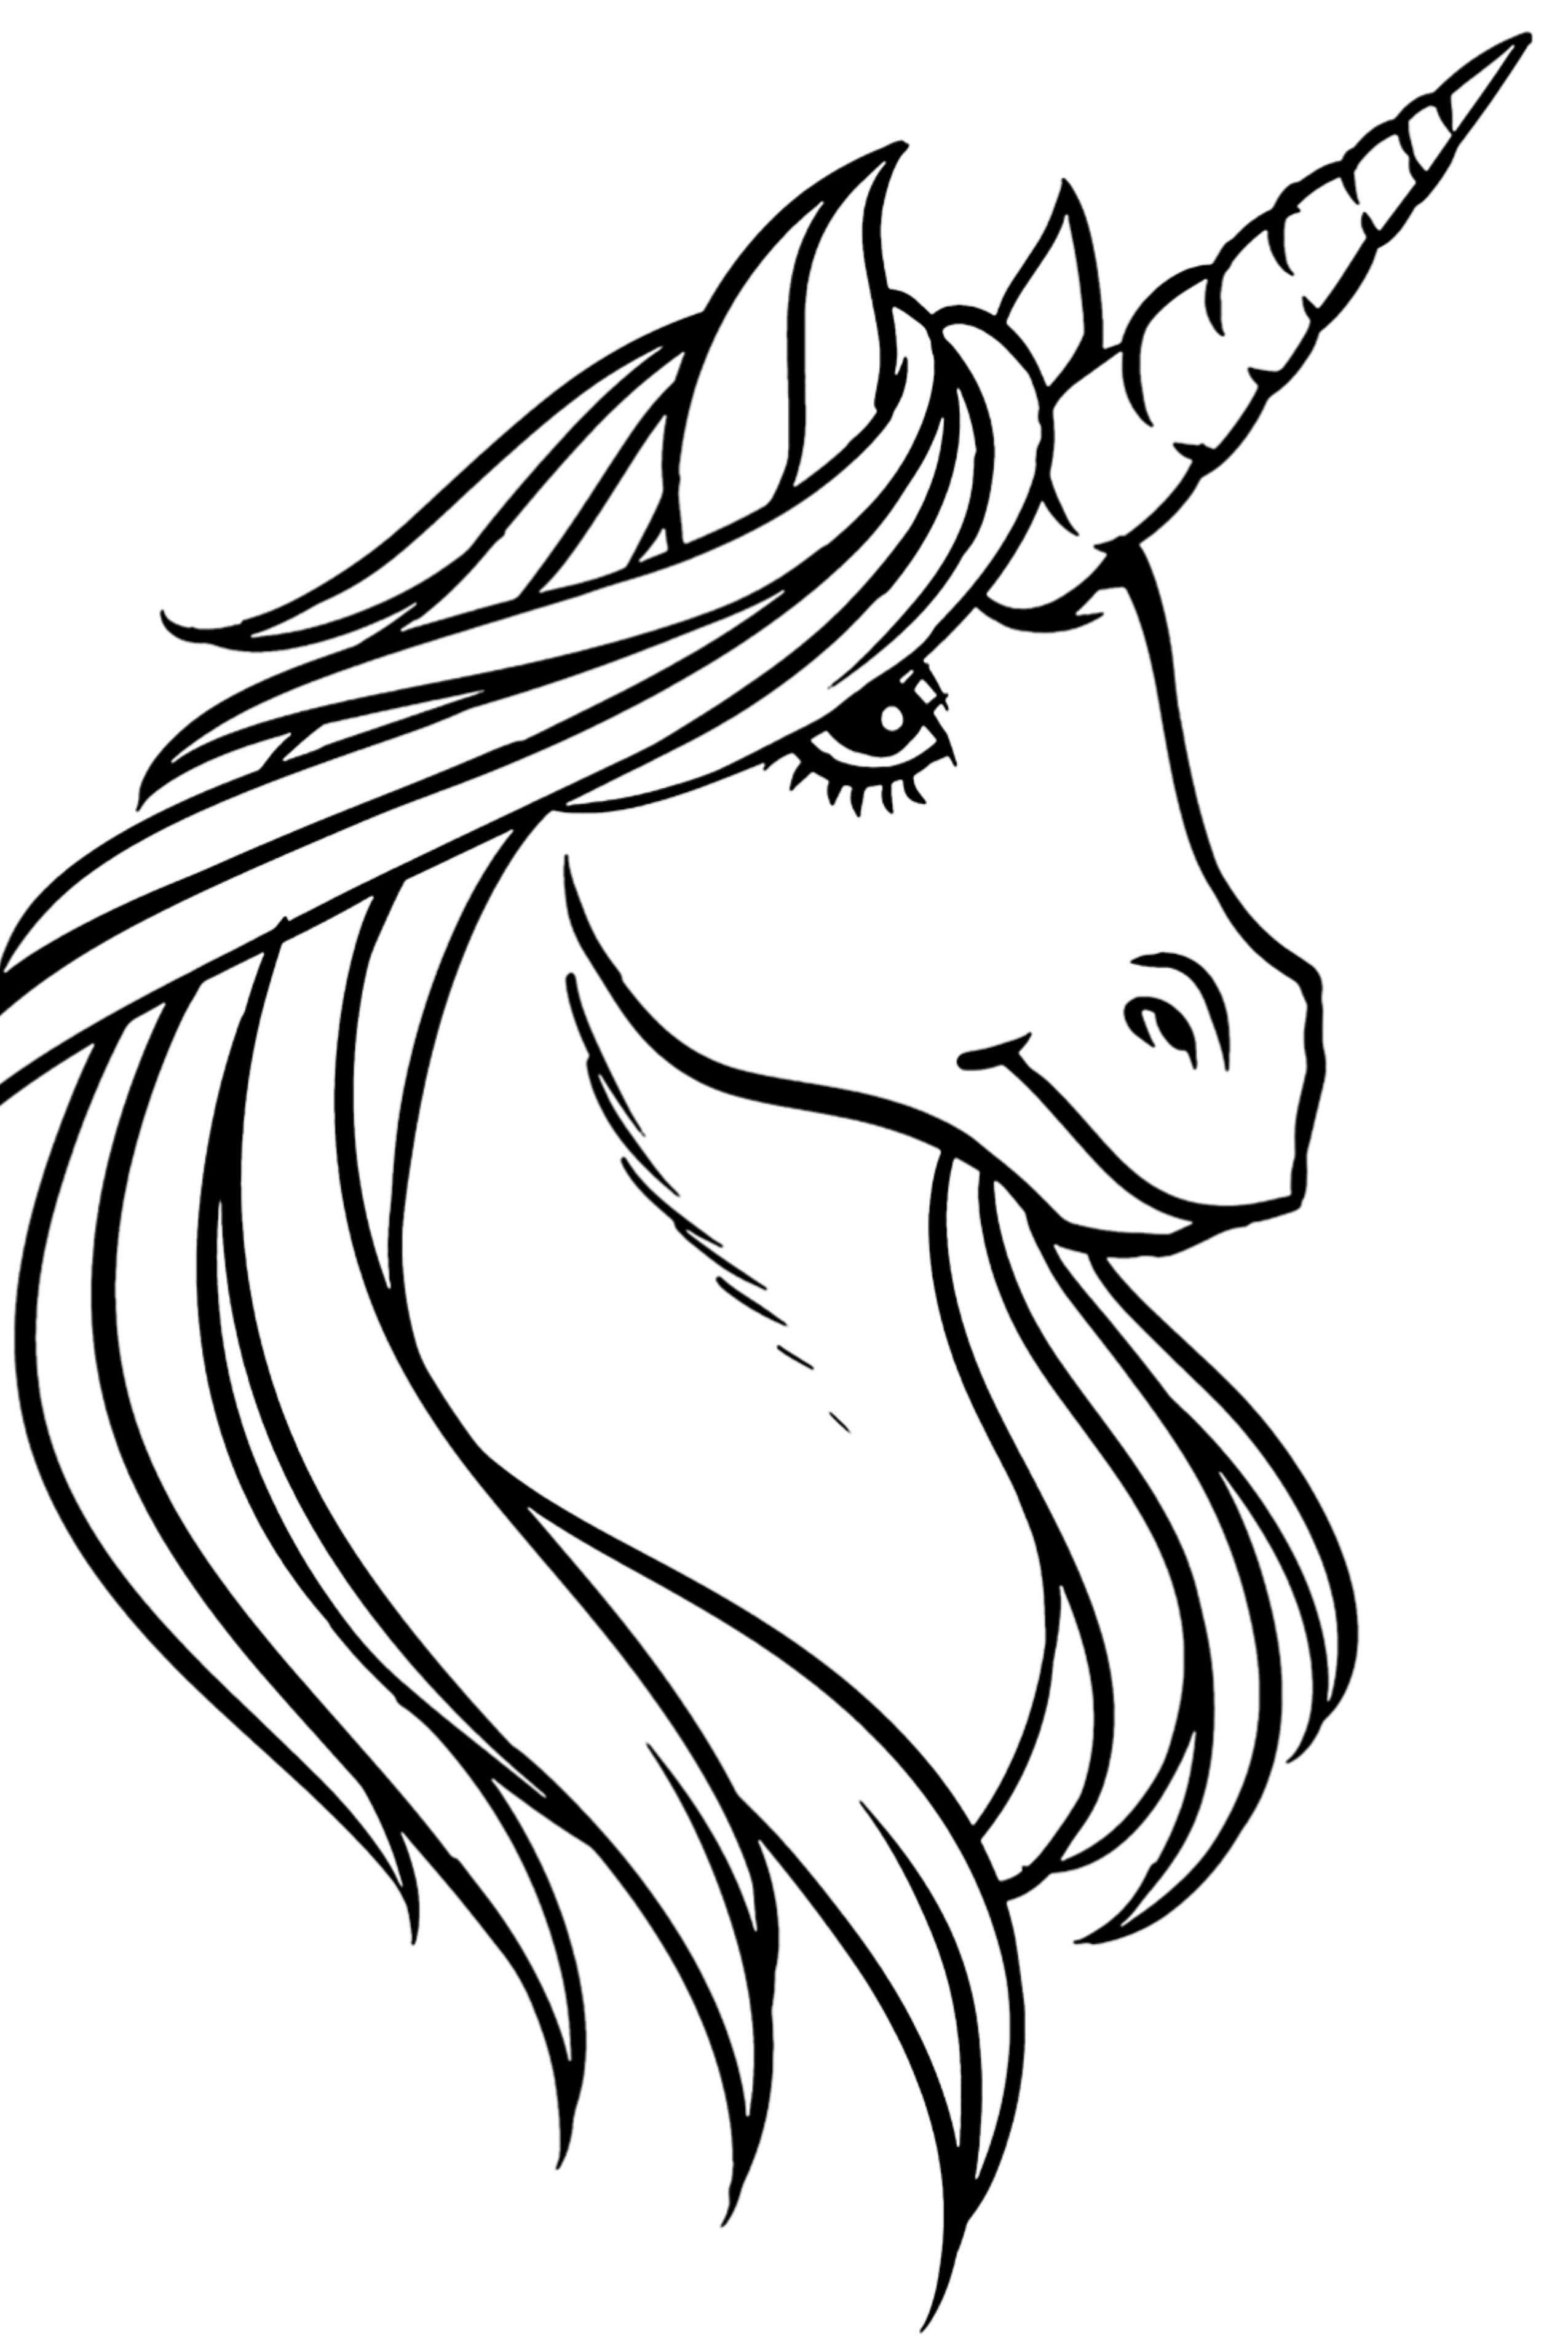 Unicorn coloring pages for kids unicorn coloring pages animal coloring pages coloring book pages